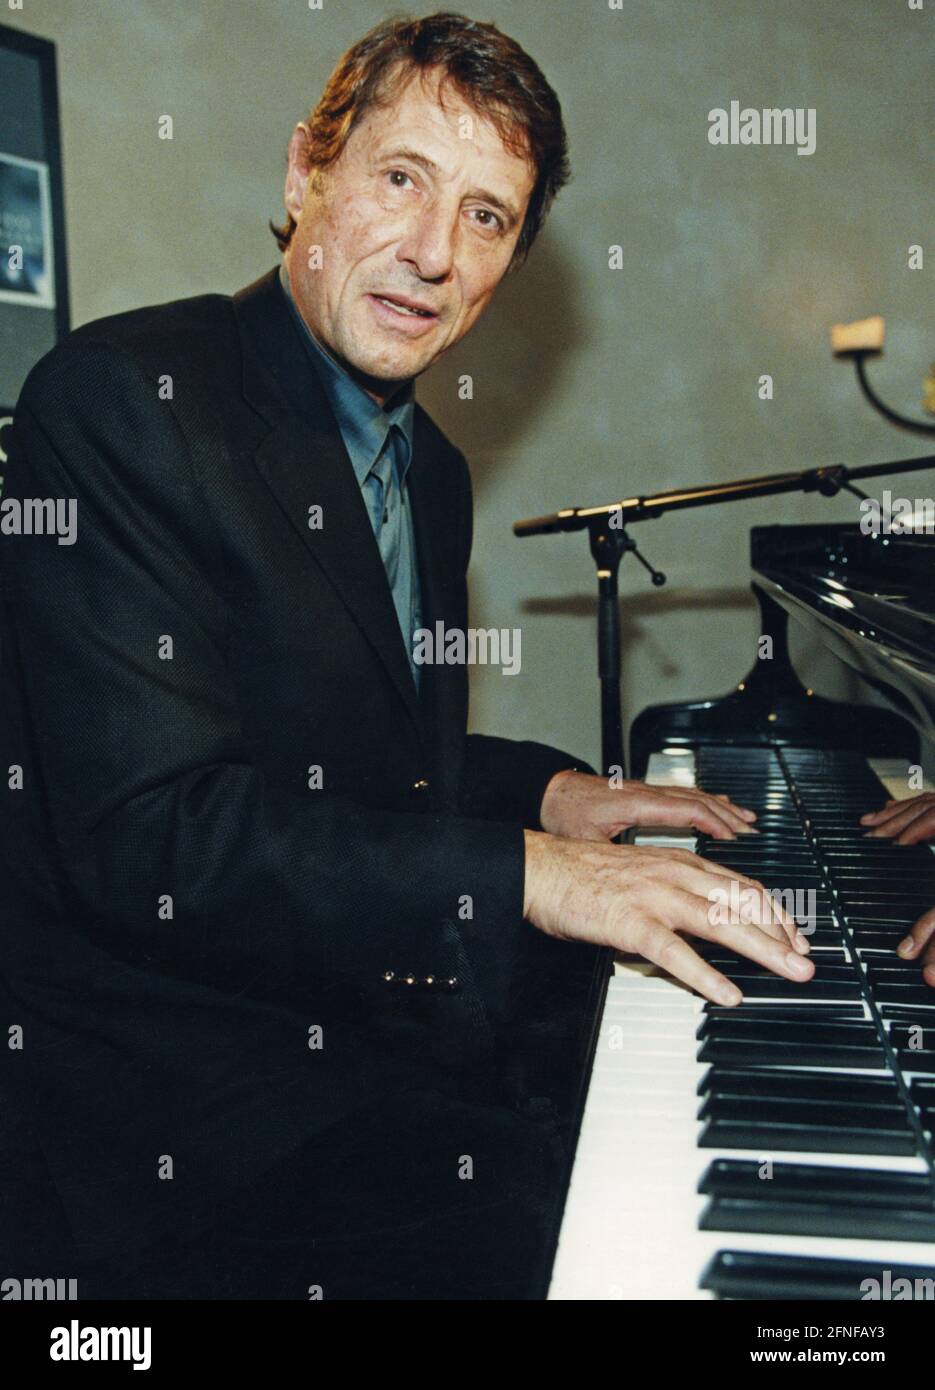 The Austrian singer Udo Jürgens at the piano. [automated translation] Stock Photo